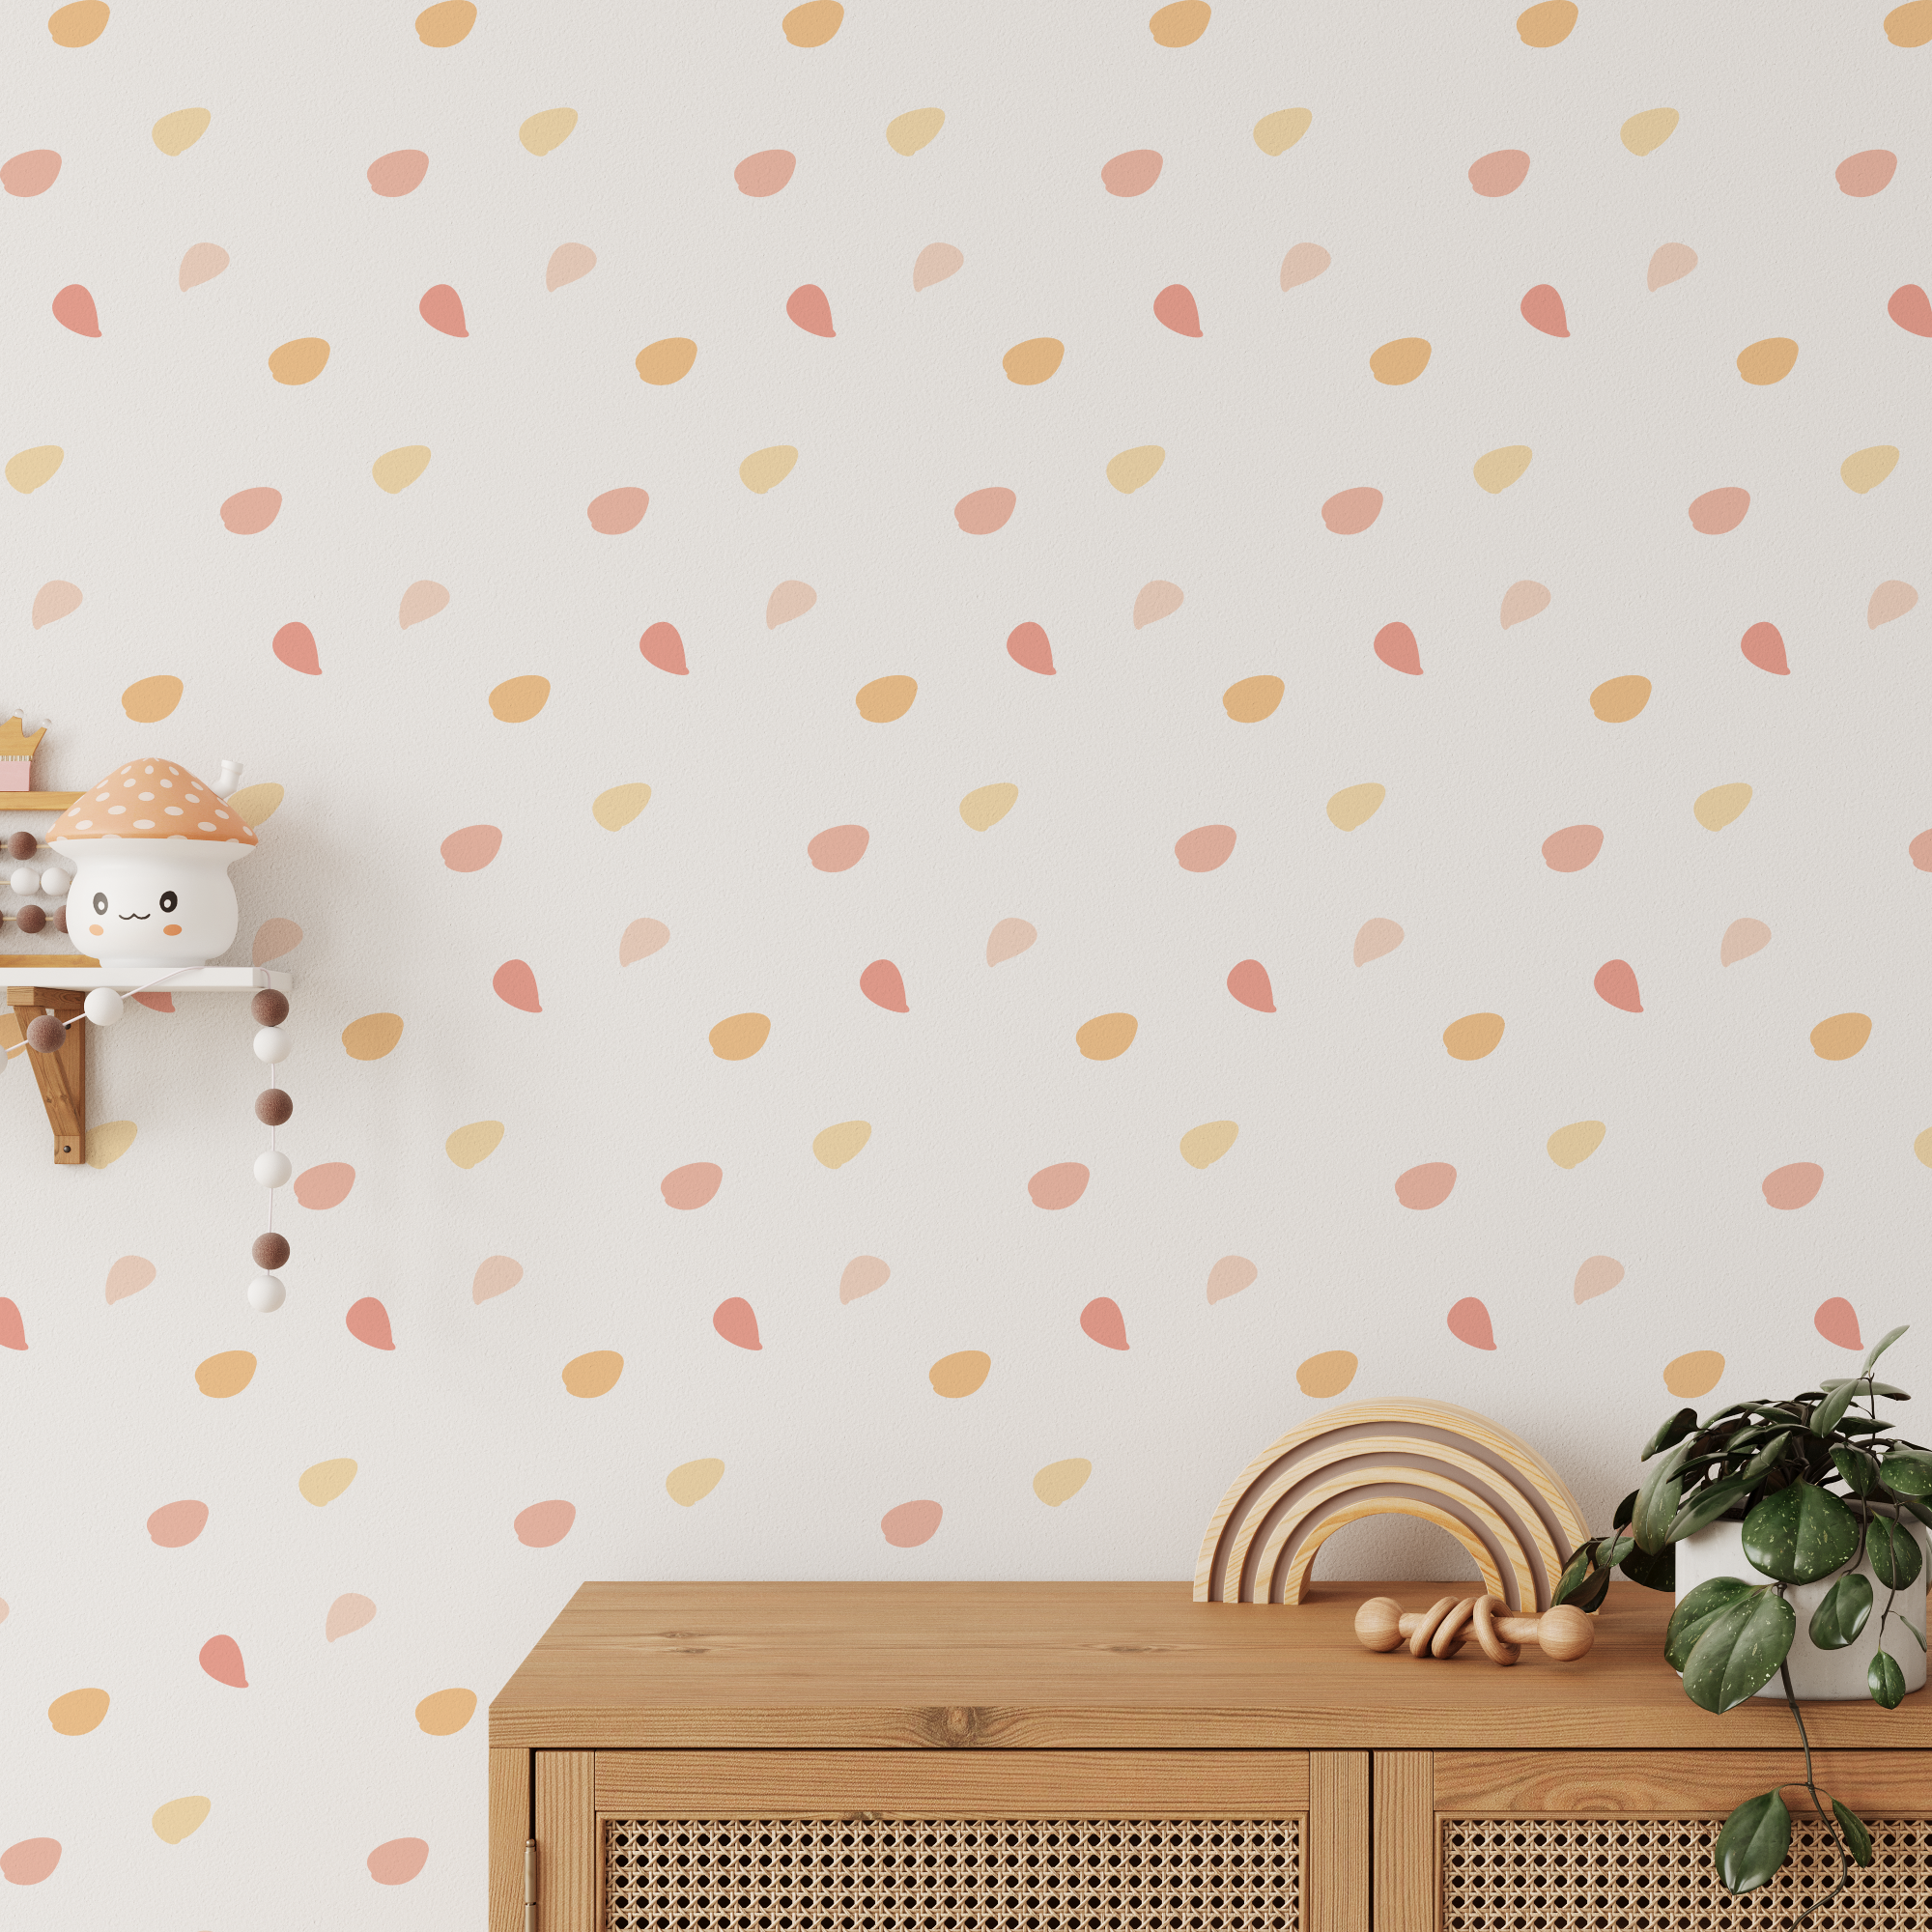 Happy Dots 180pcs Sunset Sprinkles Wall Decals